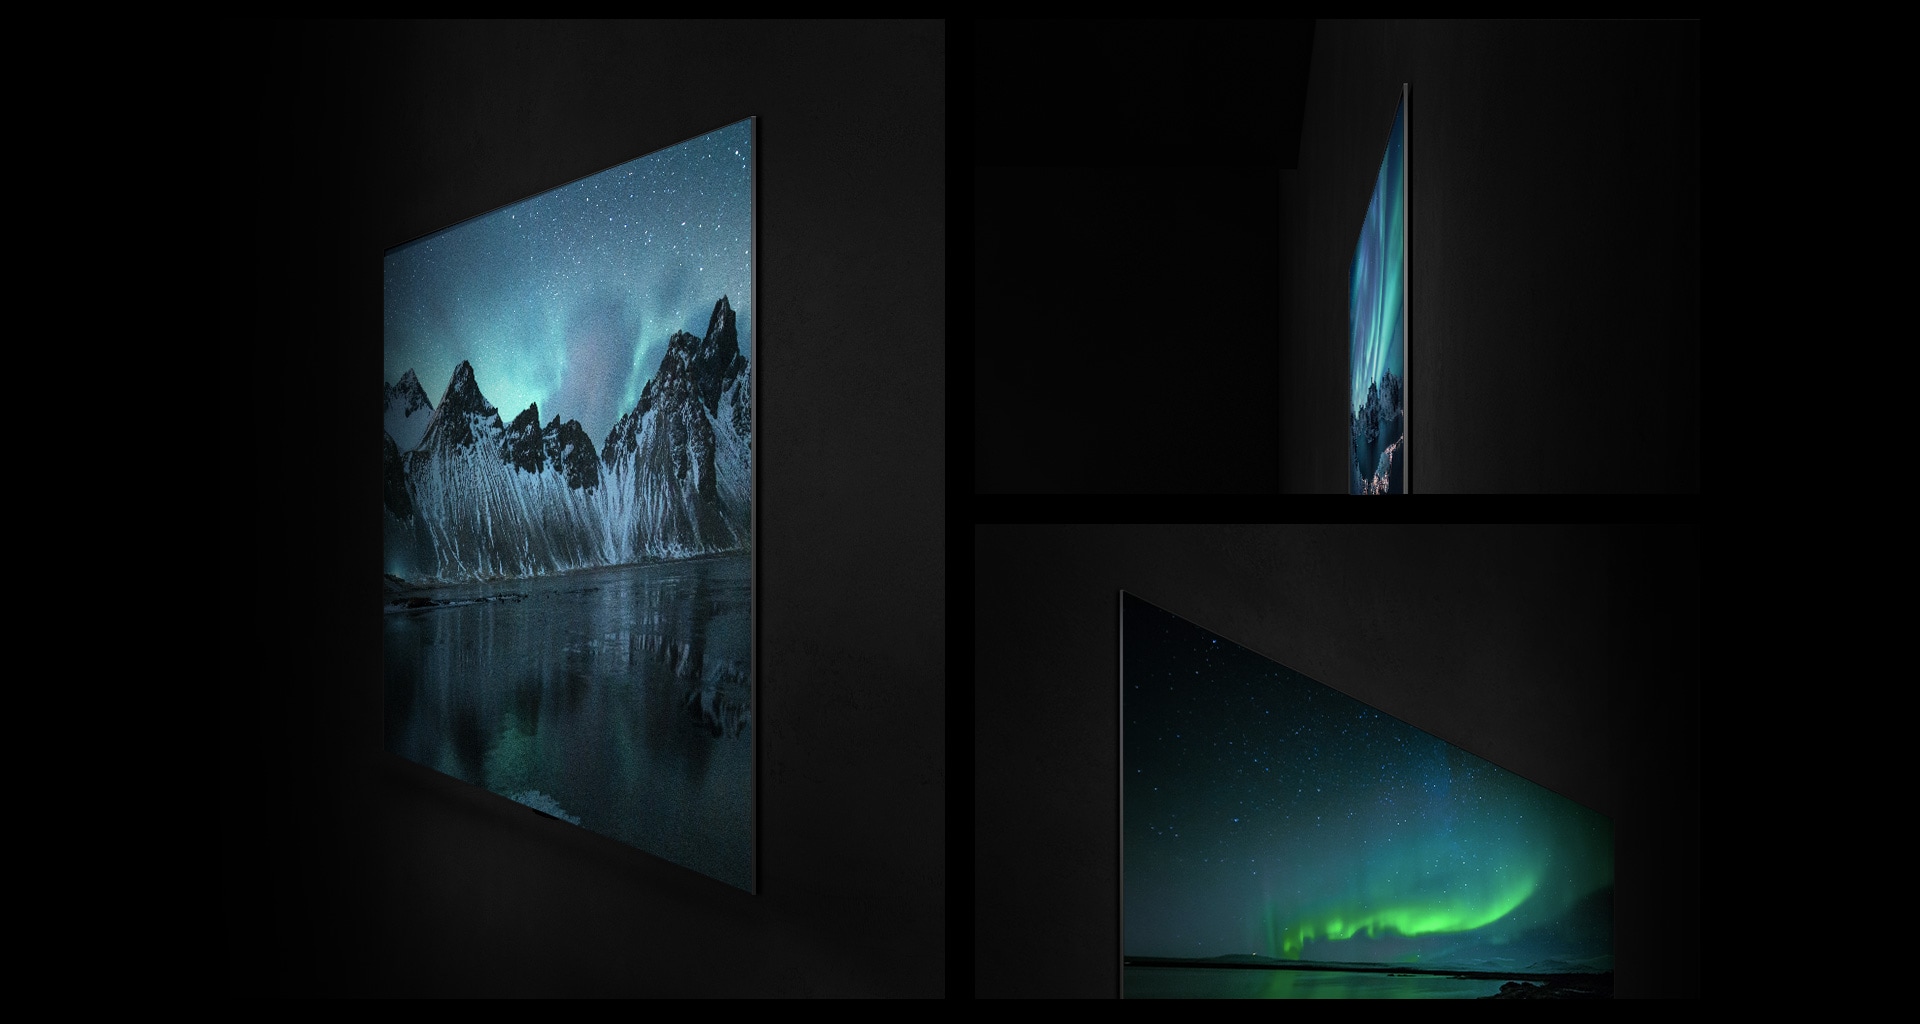 A wall-mounted LG OLED television is shown from various angles emphasizing the Gallery Design and flat back